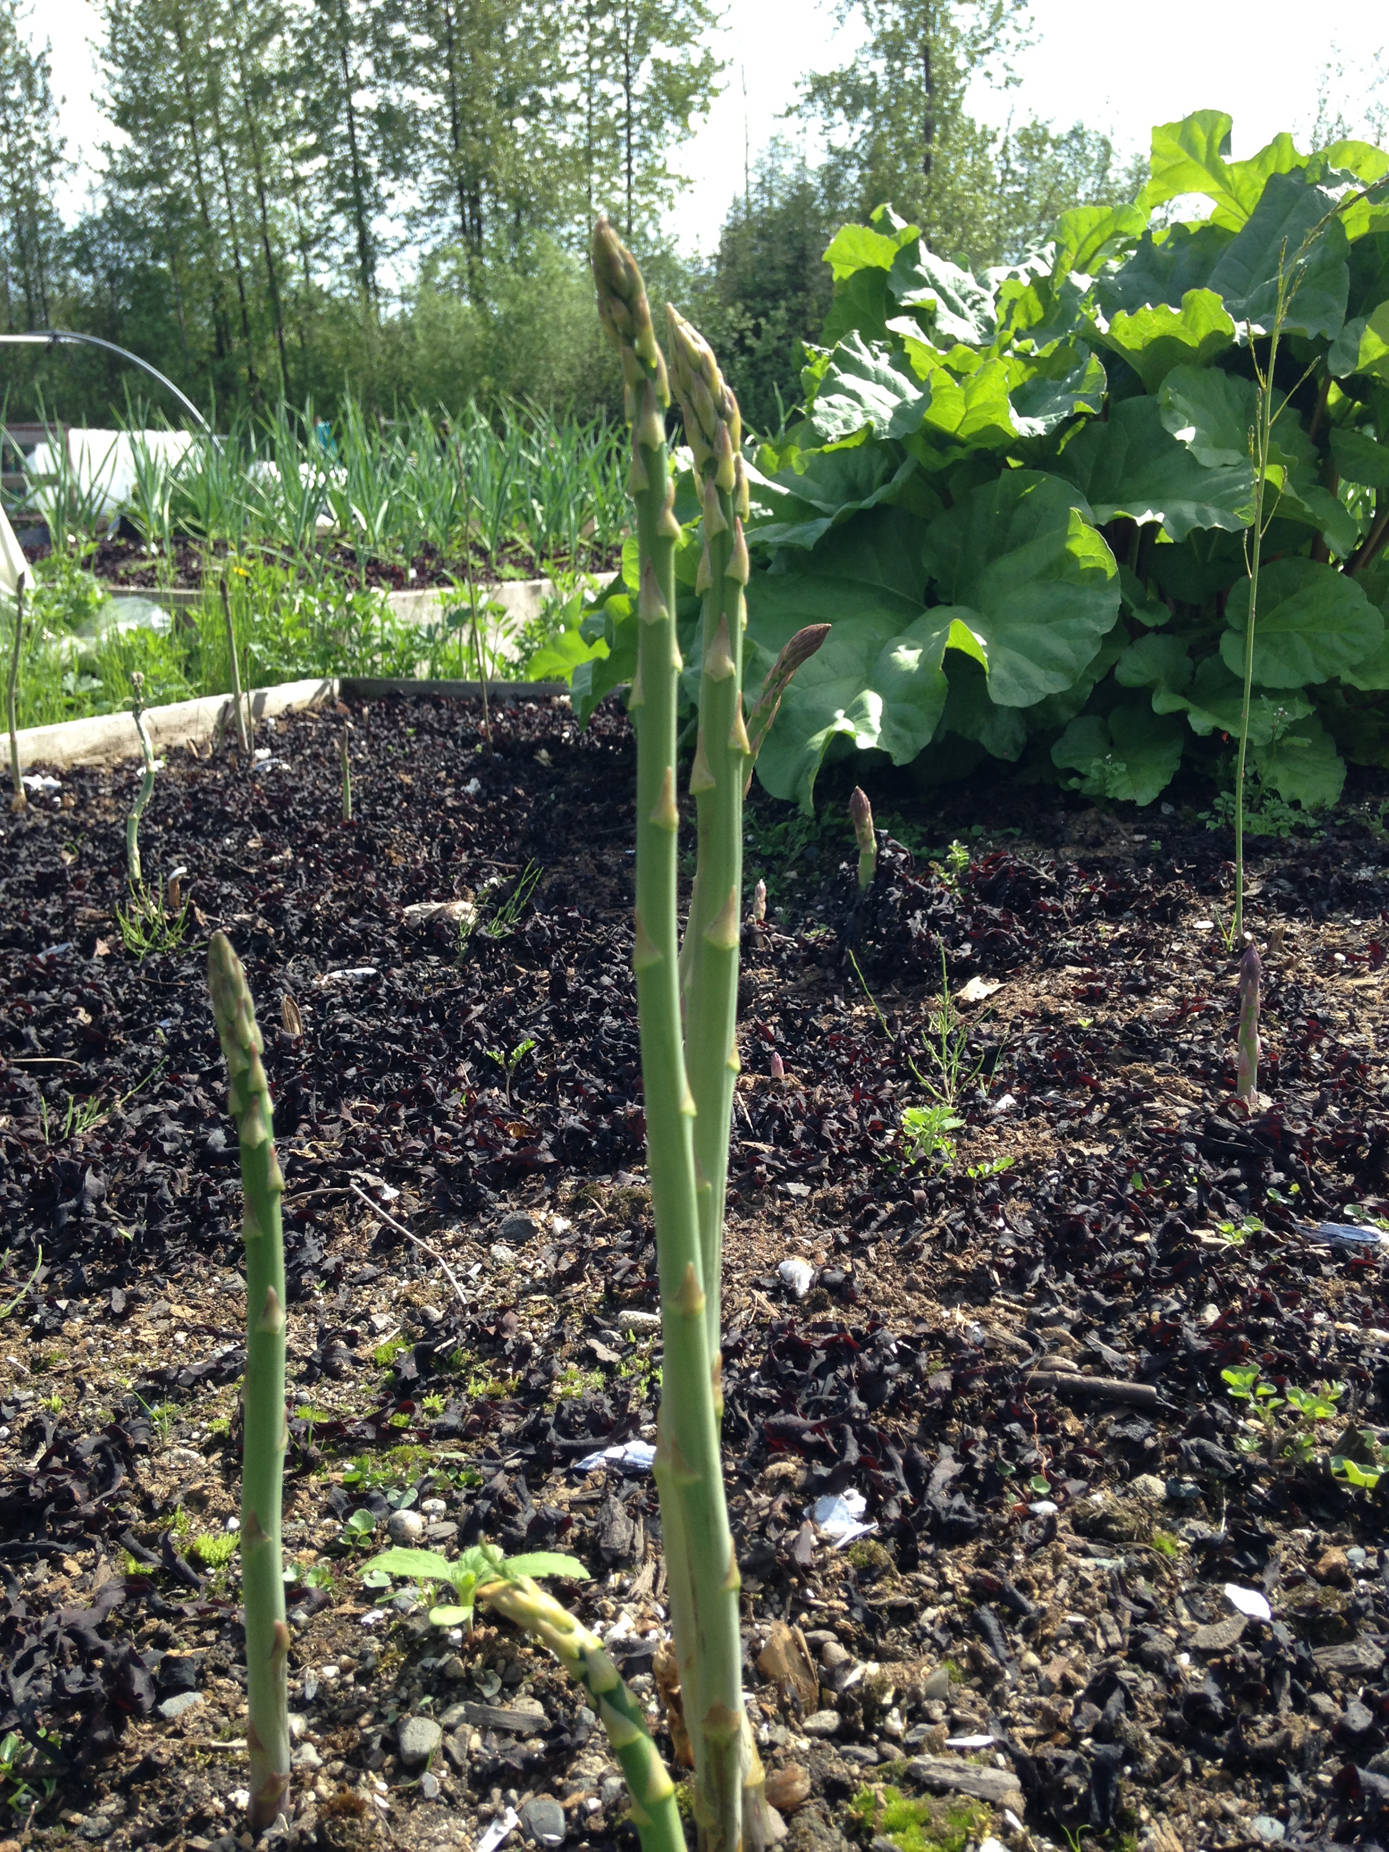 Signs of spring: asparagus and rhubarb. (Corinne Conlon | For the Juneau Empire)